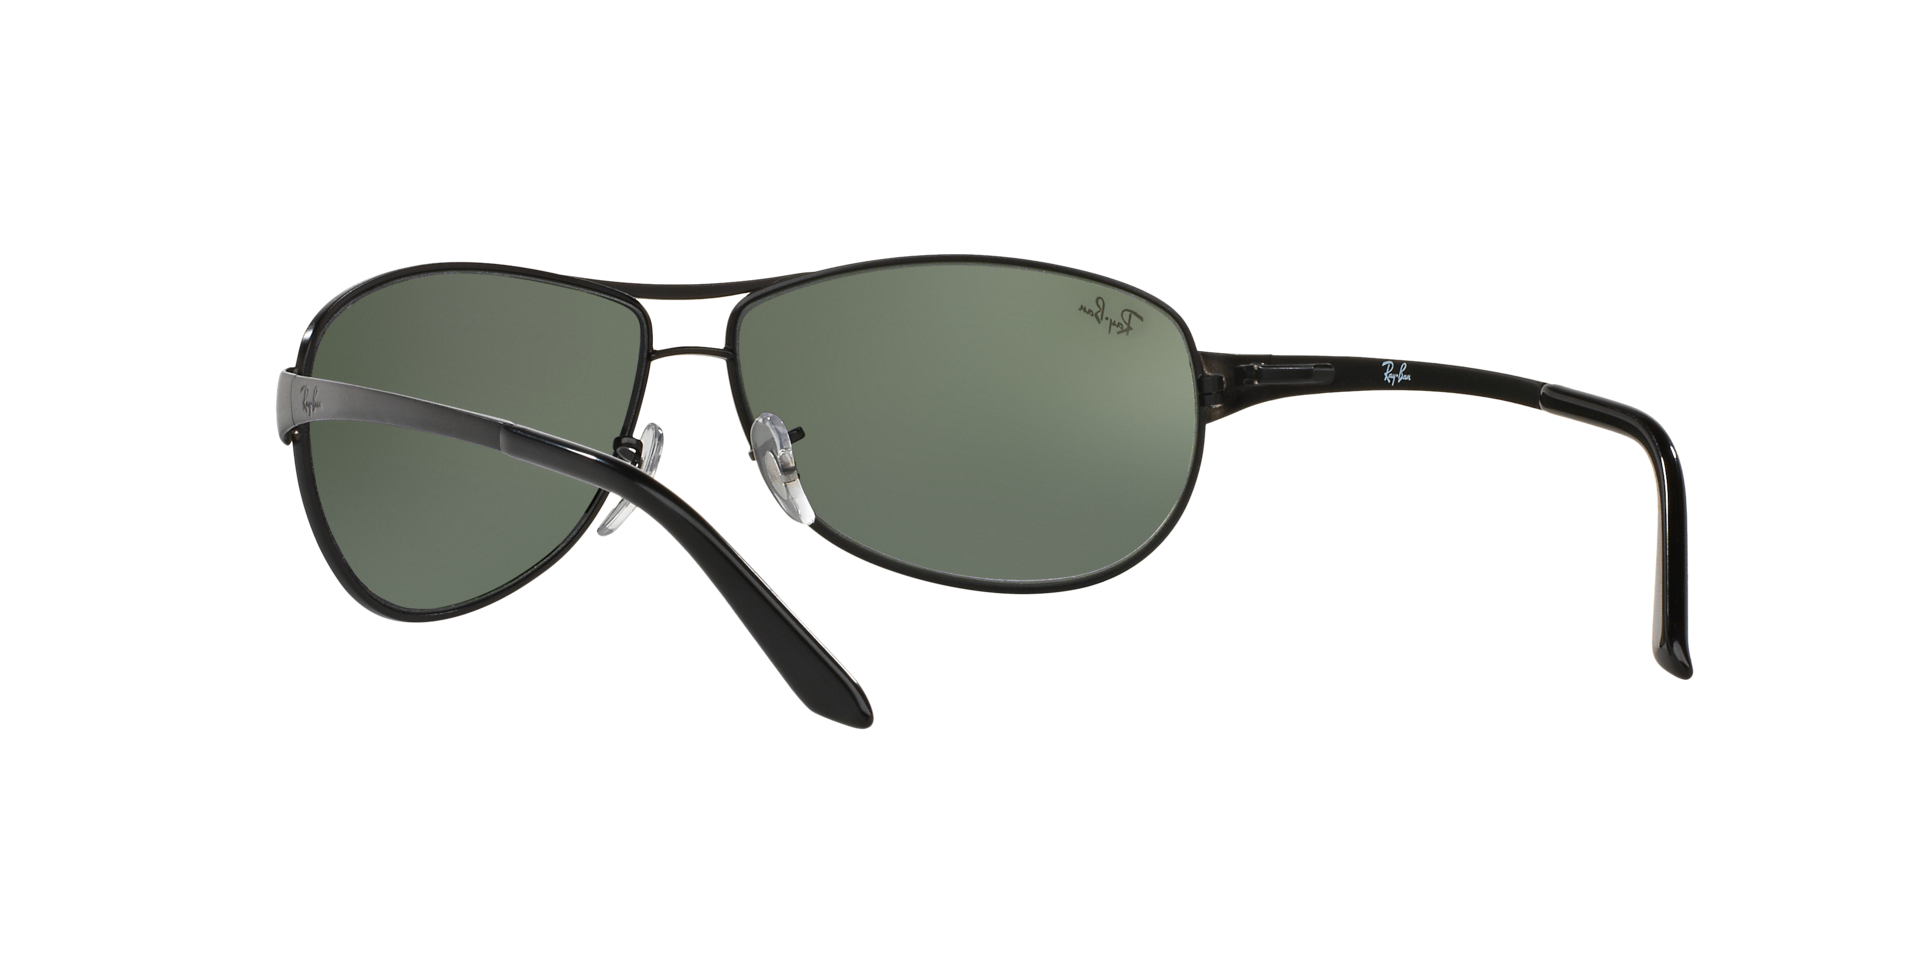 Buy Rb3342 Sunglasses Online at Ray-Ban